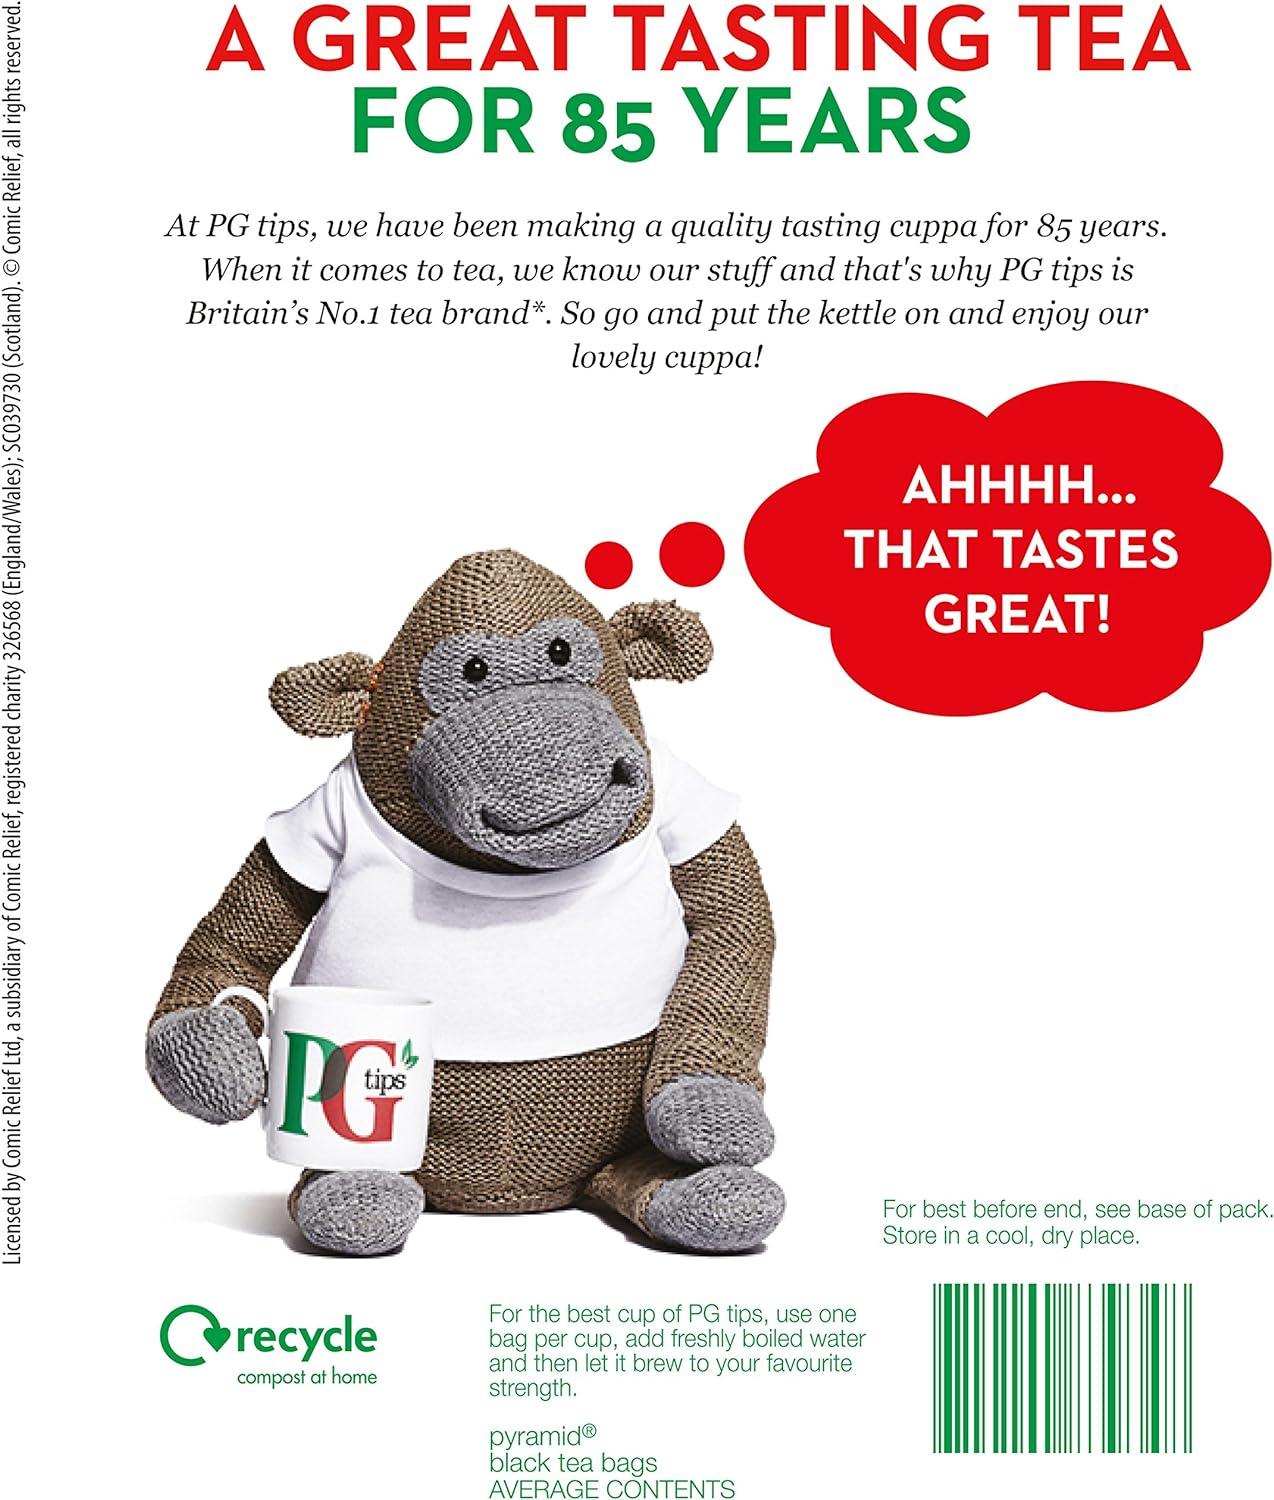 PG Tips Decaf Tea Bags - 70 count